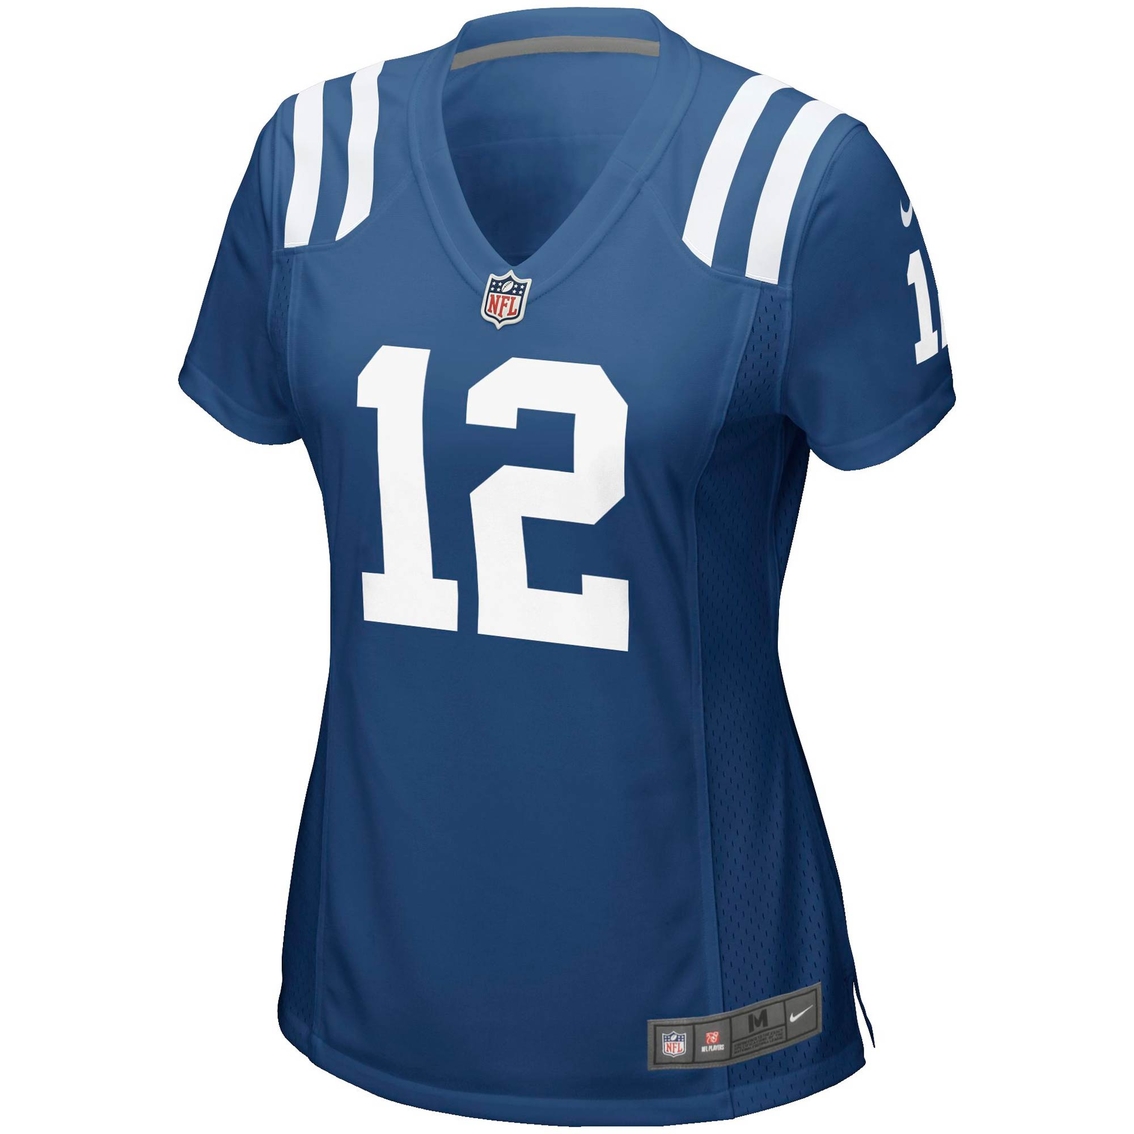 Nike Nfl Indianapolis Colts Women's Andrew Luck Jersey | Atg Archive